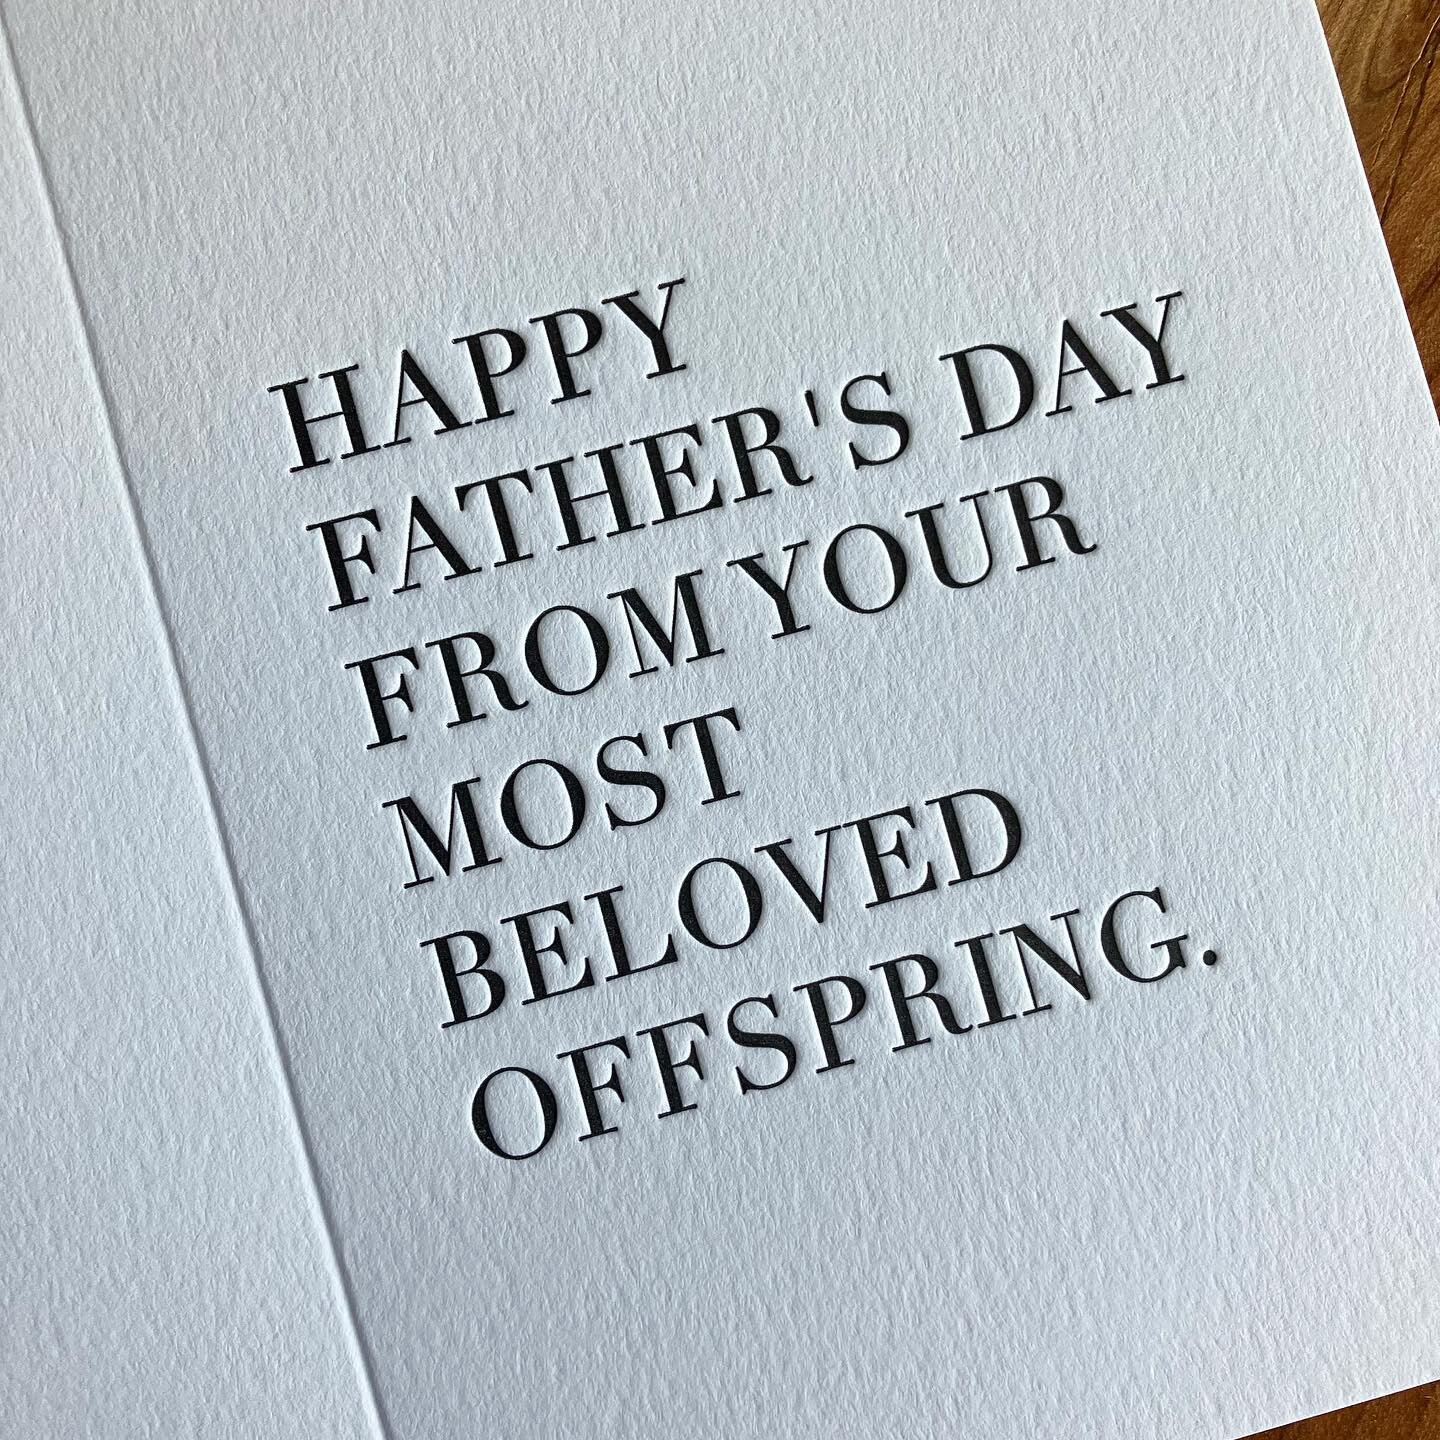 On the workbench this weekend, we are folding Father&rsquo;s Day reprints for @patinastores! 
.
.
.
.
#letterpress #letterpresslove #paper #handmade #print #madeinny #madeinusa #upstate #dad #father #fathersday #dads #greetingcard